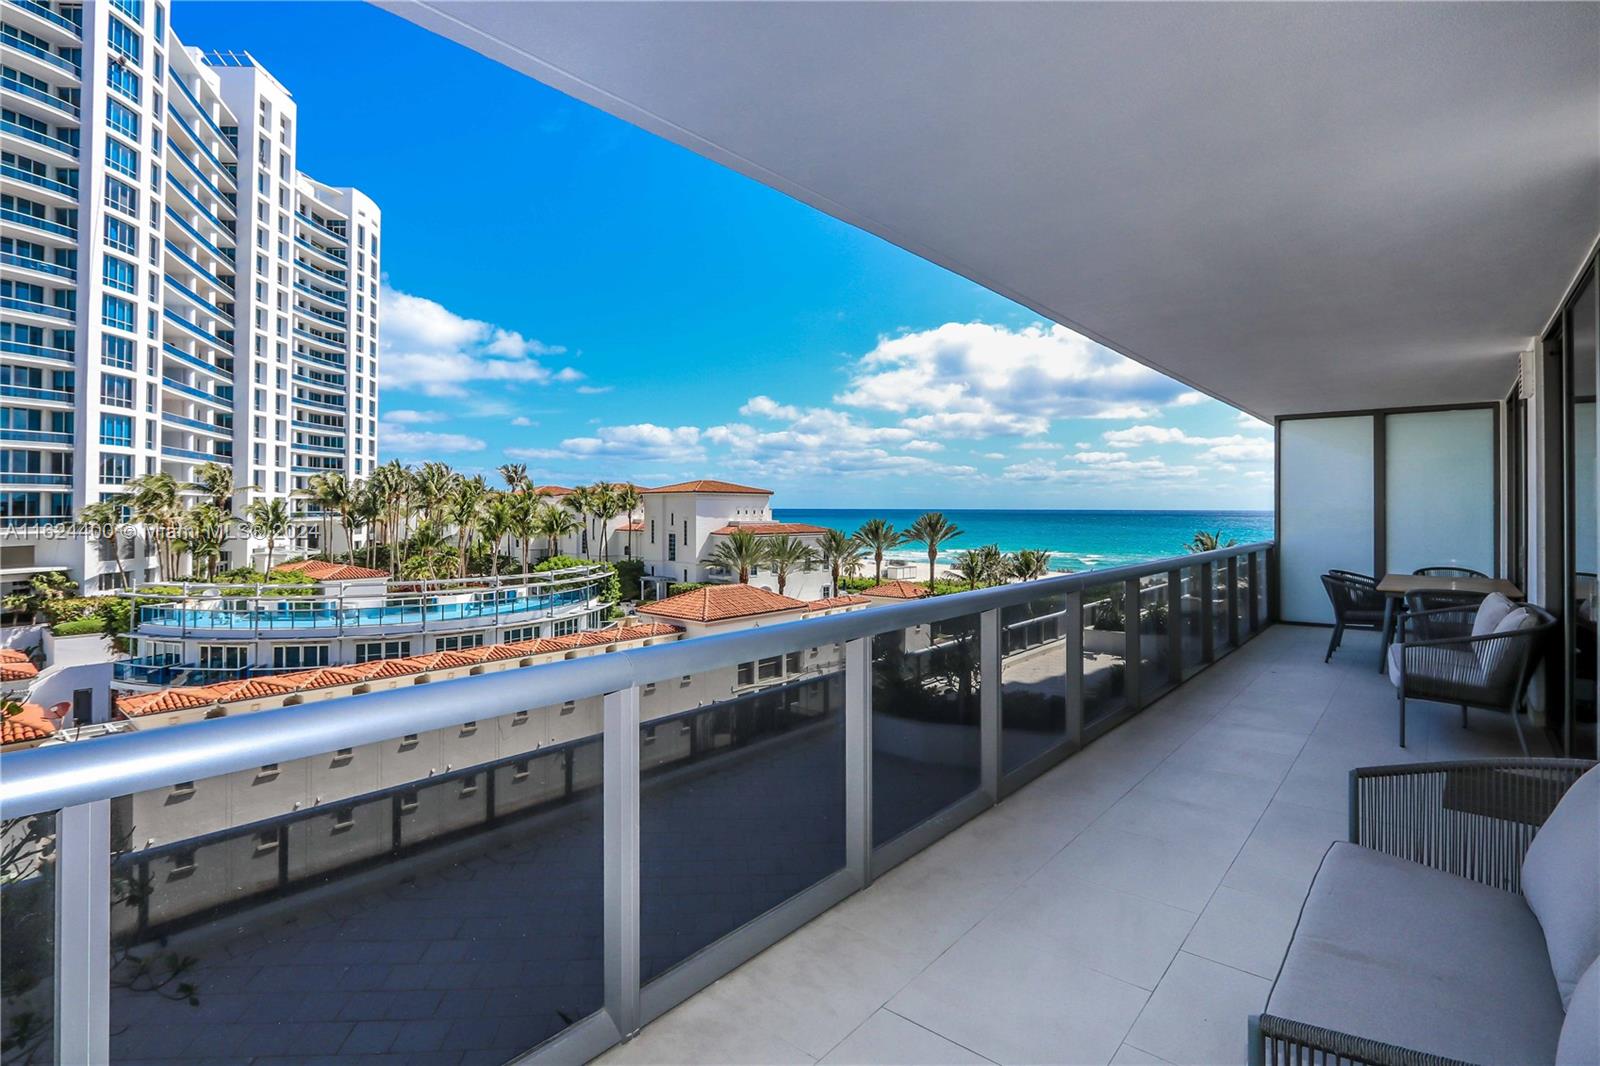 MEI is considered one of the most elegant condominium in Miami Beach on Collins Ave. 22 Stories and just 135 units. Situated on Collins and 58th this 2 Beds/2,5 Baths with Ocean and City views comes furnished and available for annual and Seasonal Leases. This building has amenities like swimming pool, beach club, clubhouse, business center, concierge services and an incredible lobby with TEA lounge and ZEN library. Email or Text for showings.